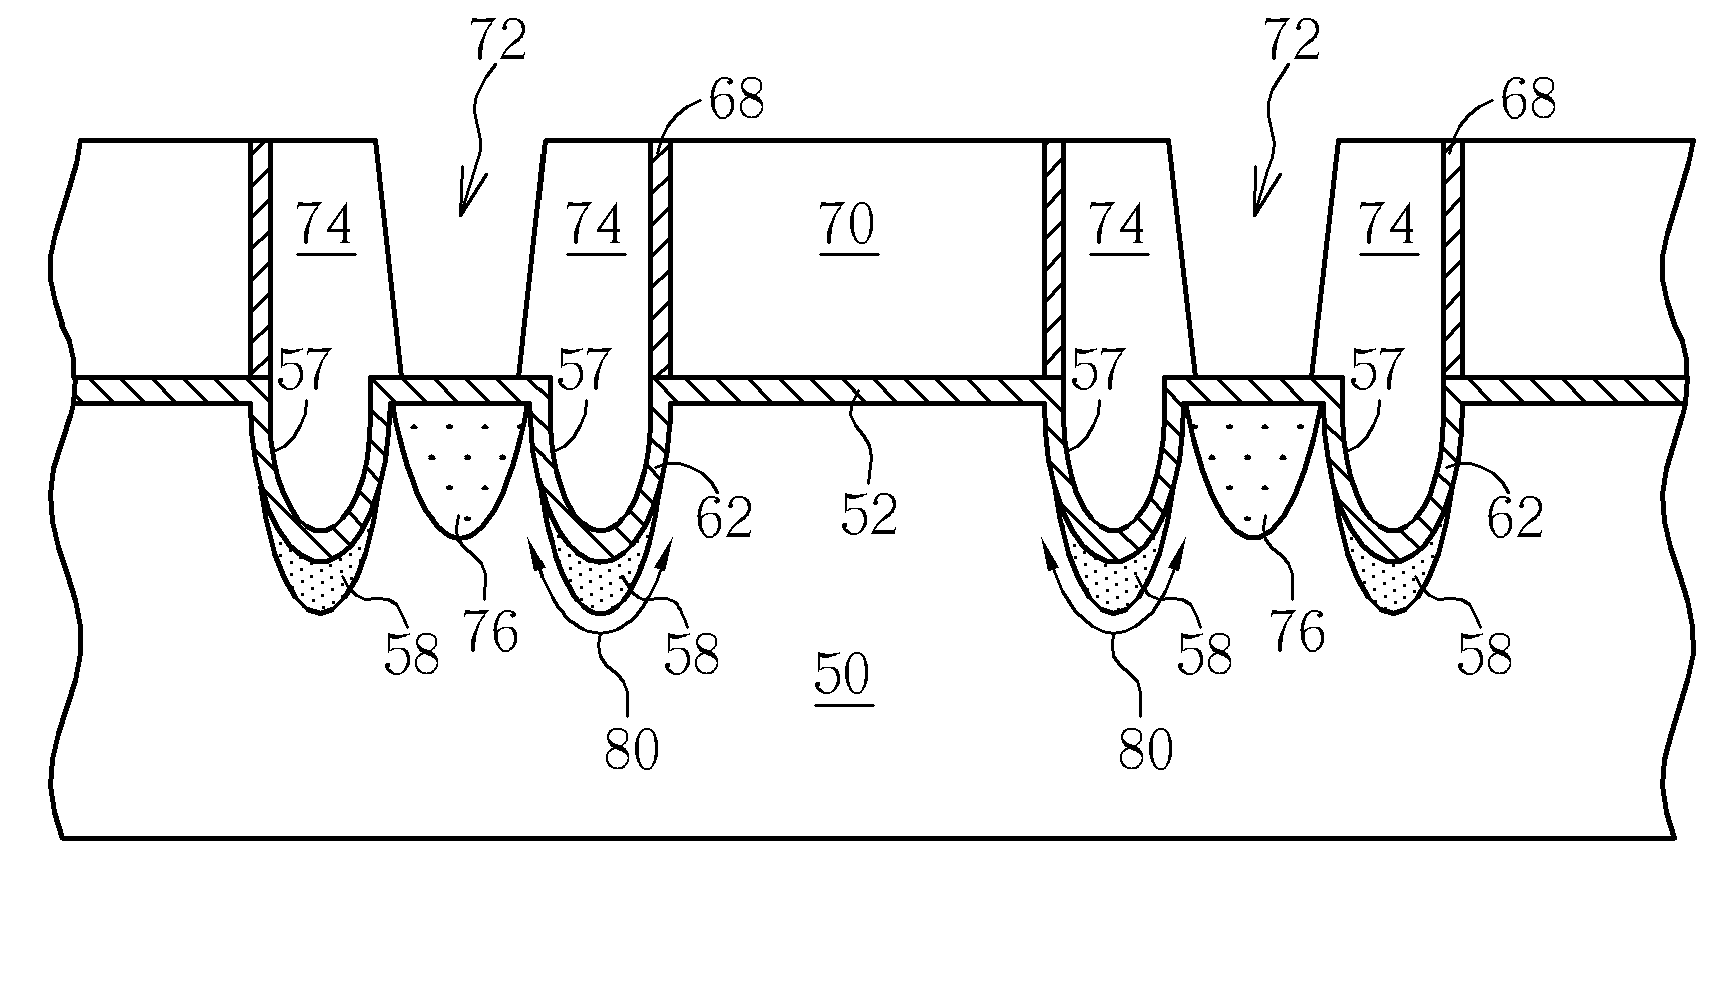 Two bit u-shaped memory structure and method of making the same